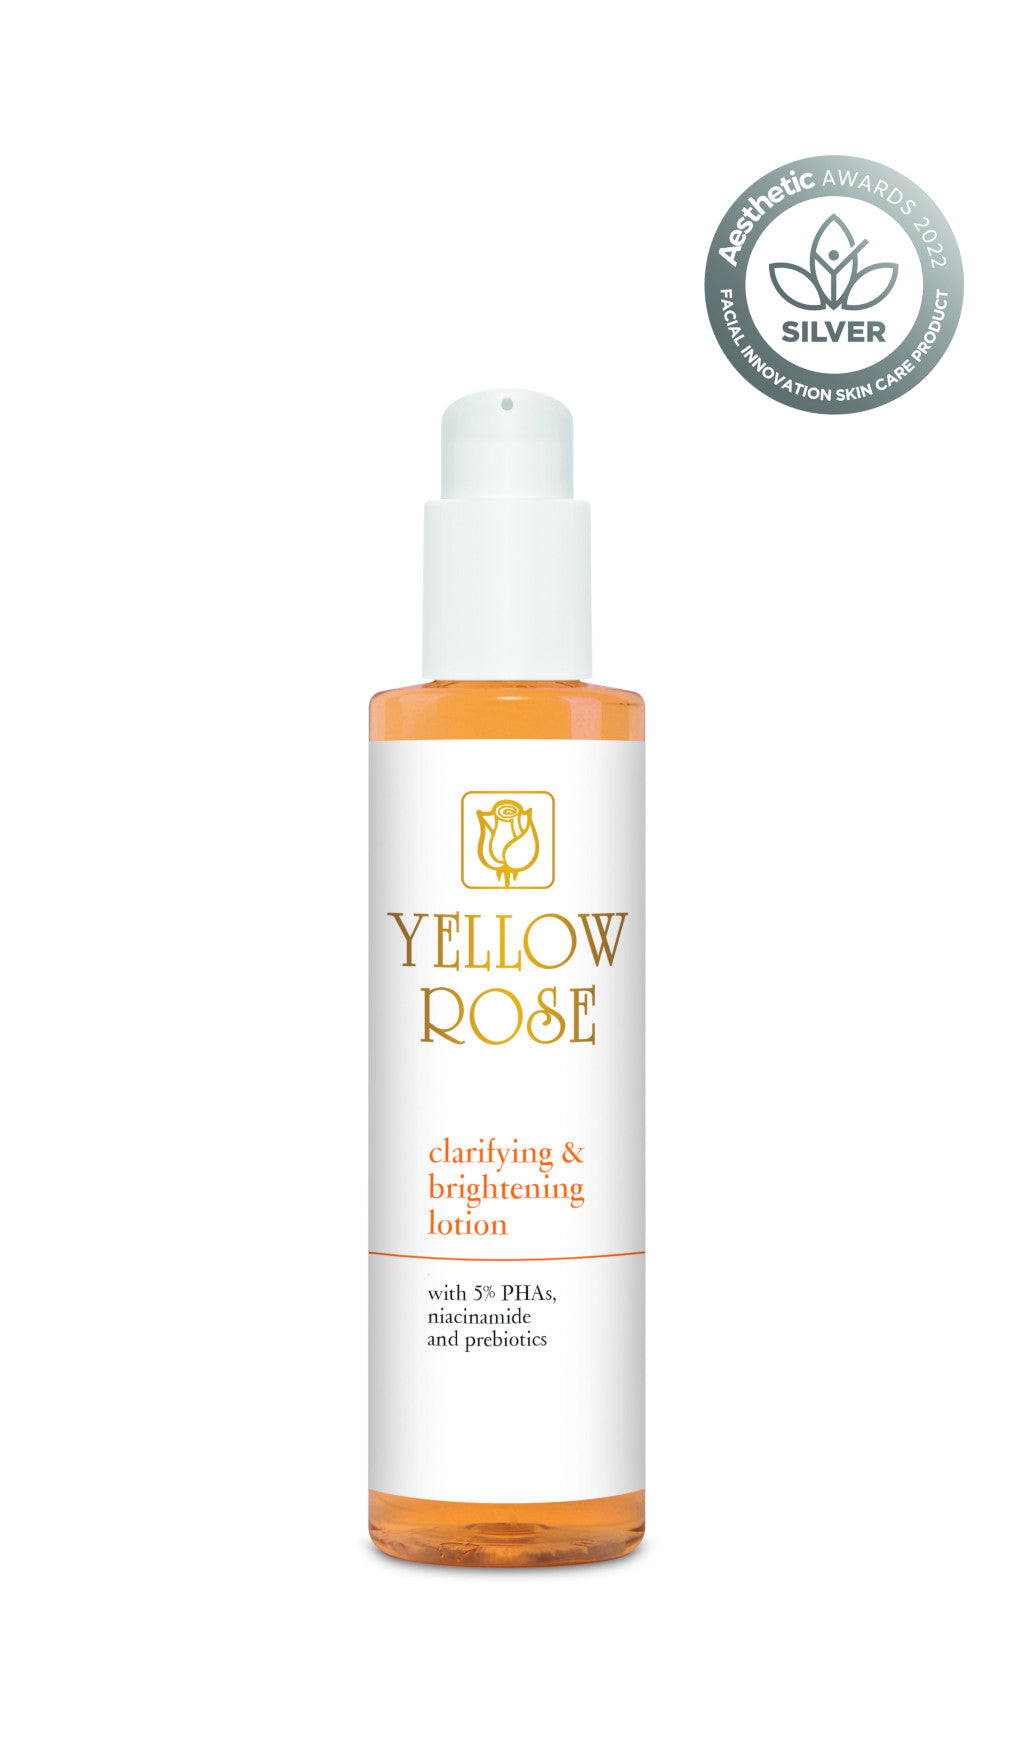 Clarifying lotion by Yellow Rose